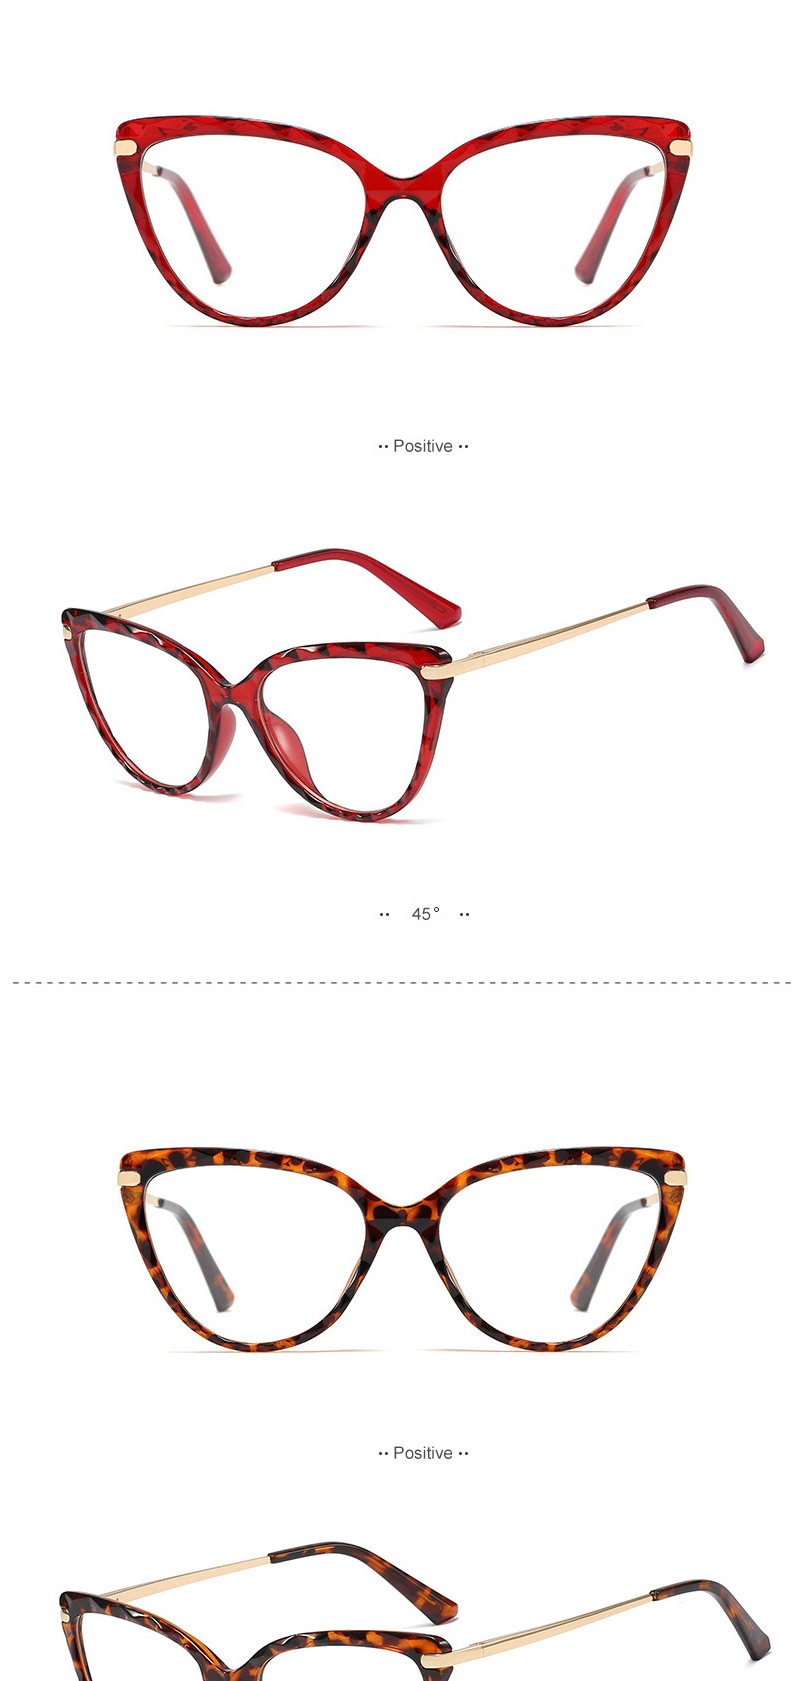 Fashion C5 Red/blue Light Tr90 Spring Cut Edge Anti-blue Light Can Be Equipped With Myopia Flat Lens,Fashion Glasses